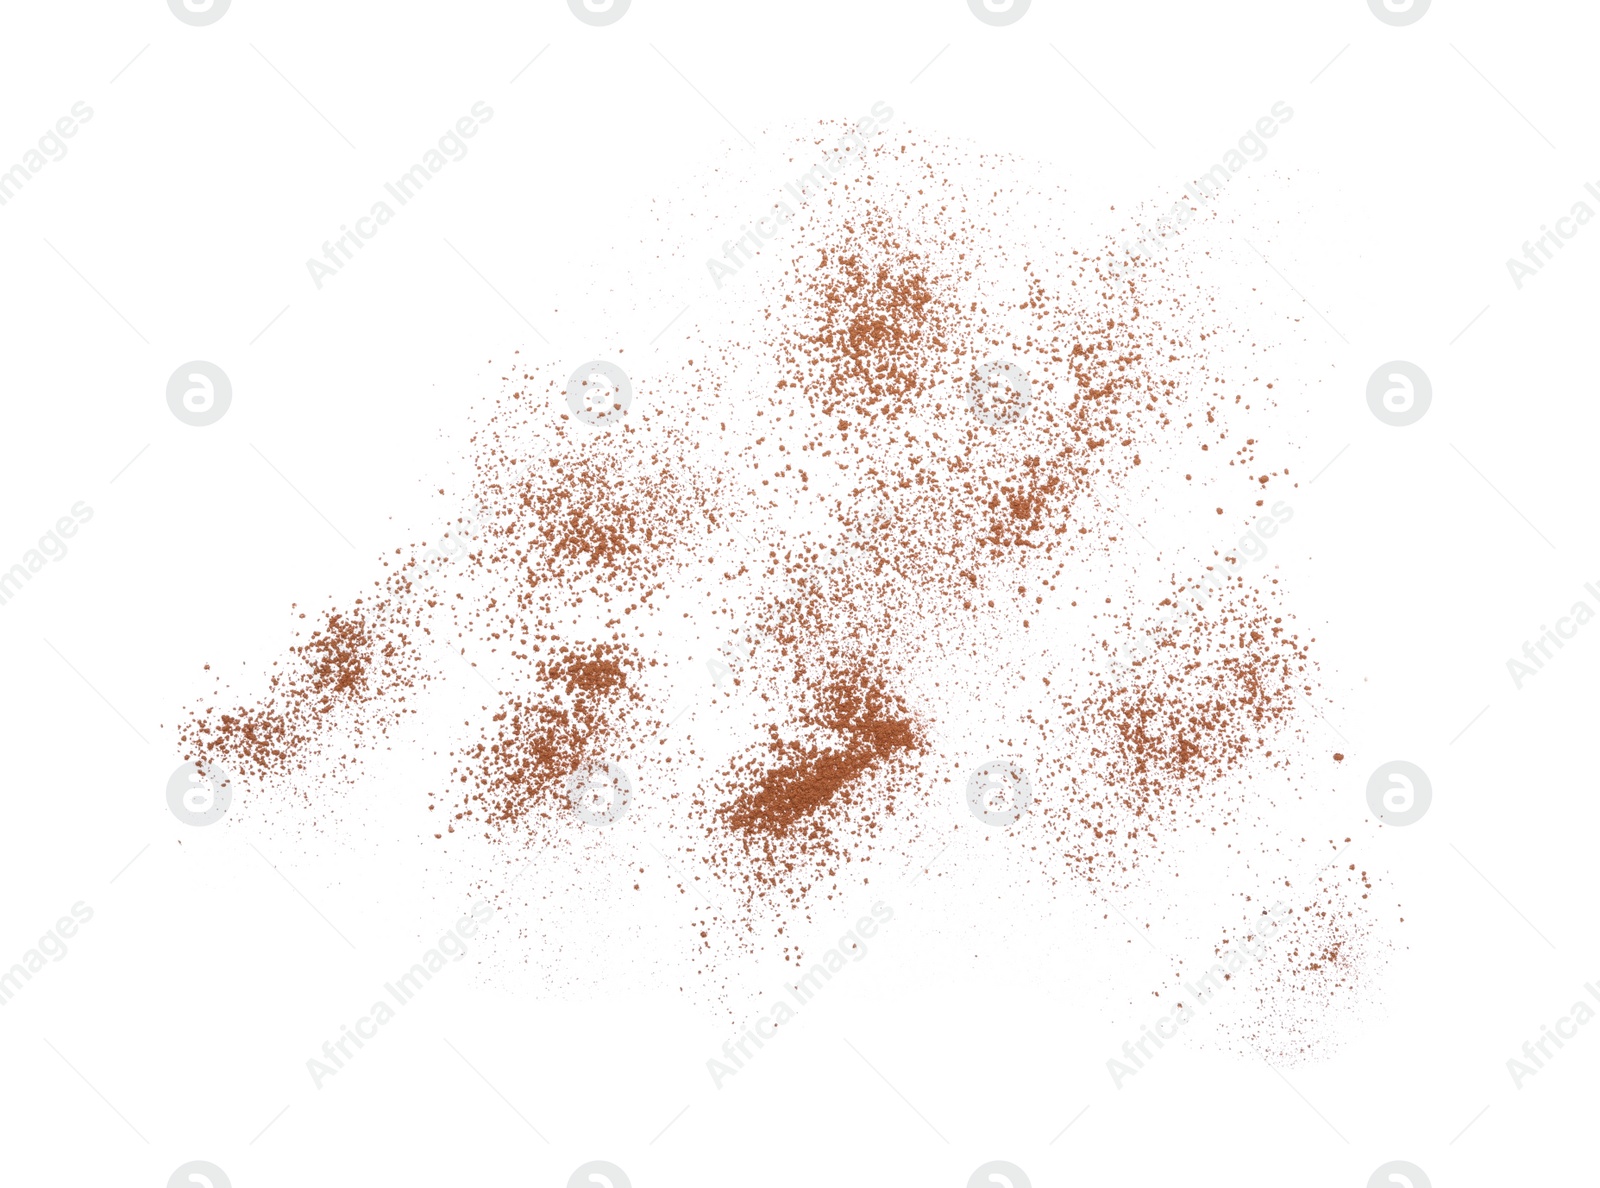 Photo of Brown cocoa powder on white background, top view